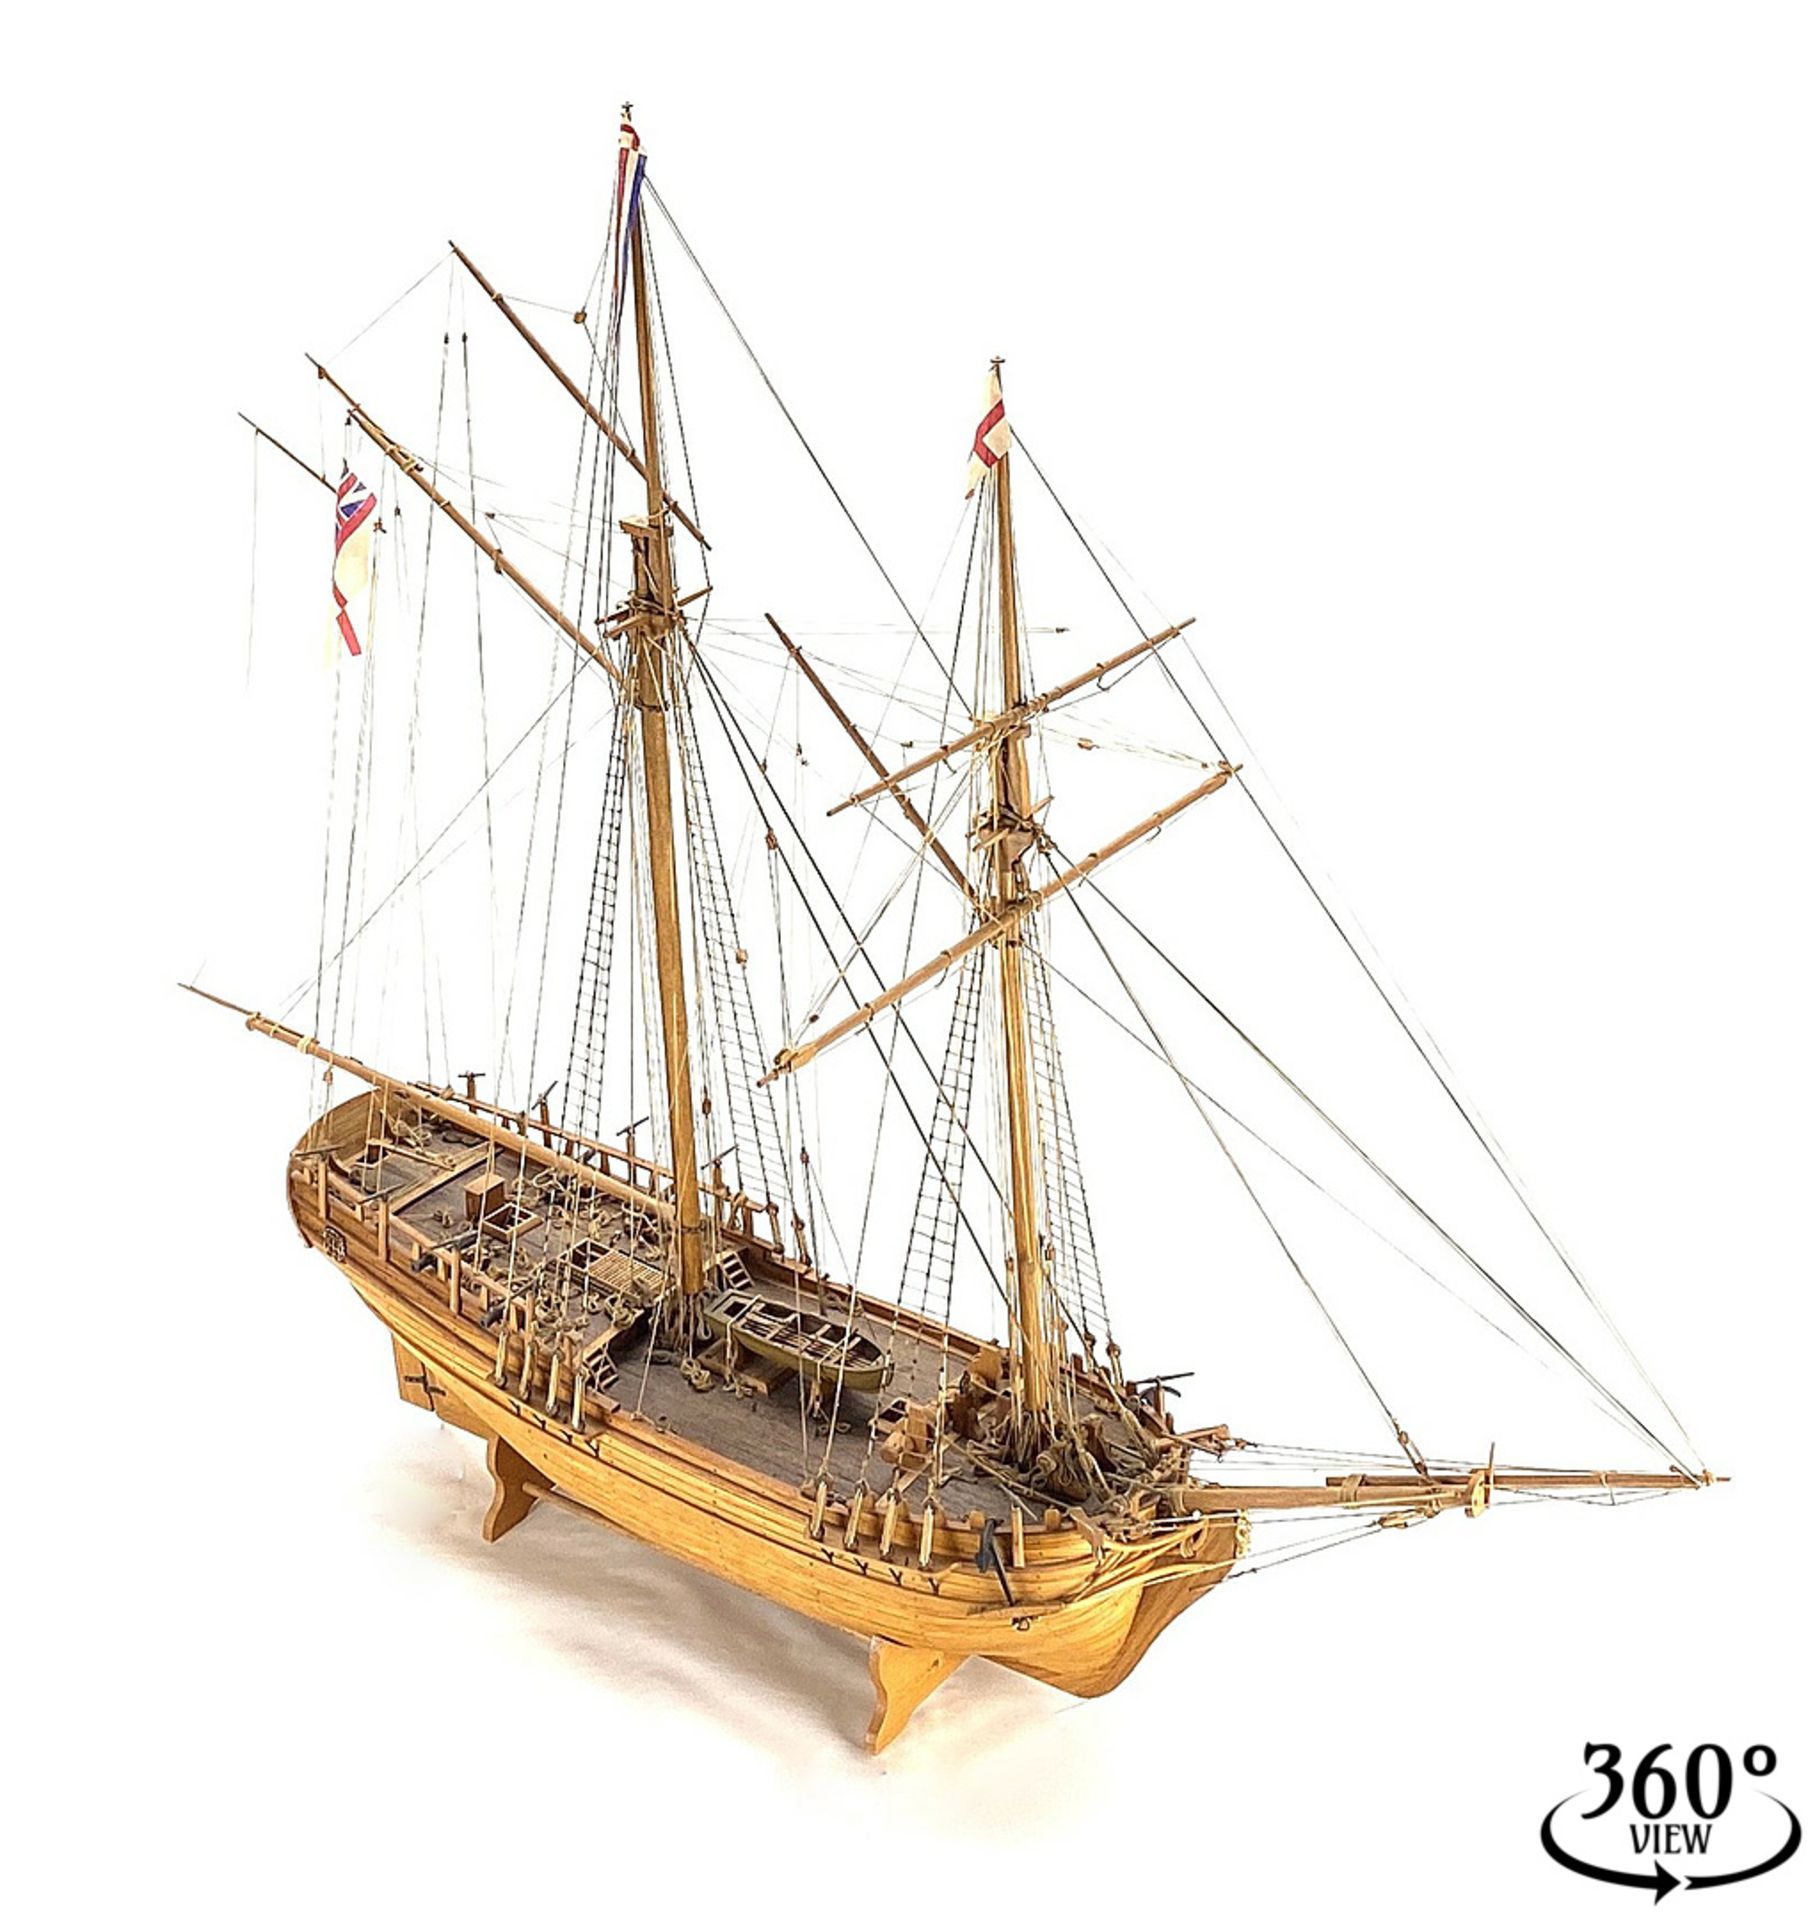 Ship model of the English schooner "LYDE", 18th century